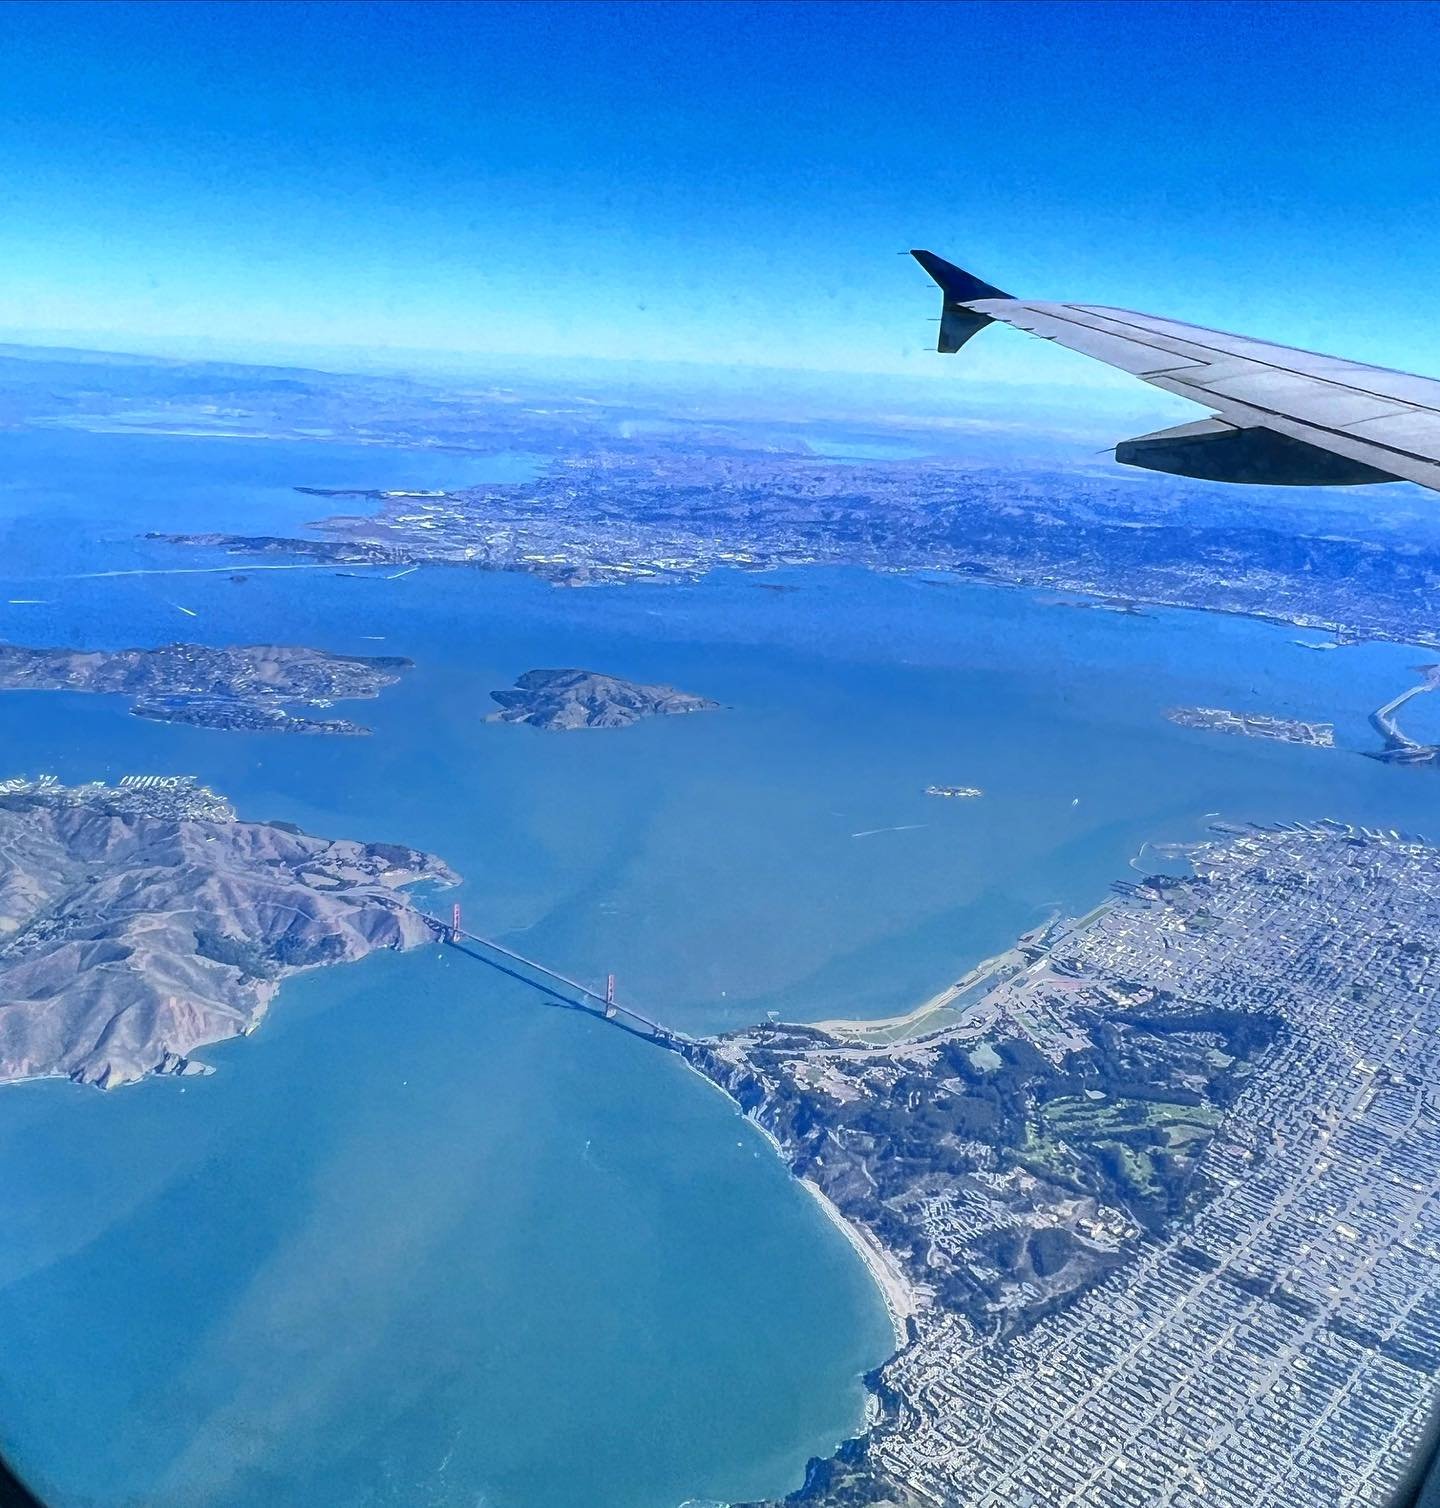 Hello San Francisco Bay Area - loving the clear blue sky and display below.